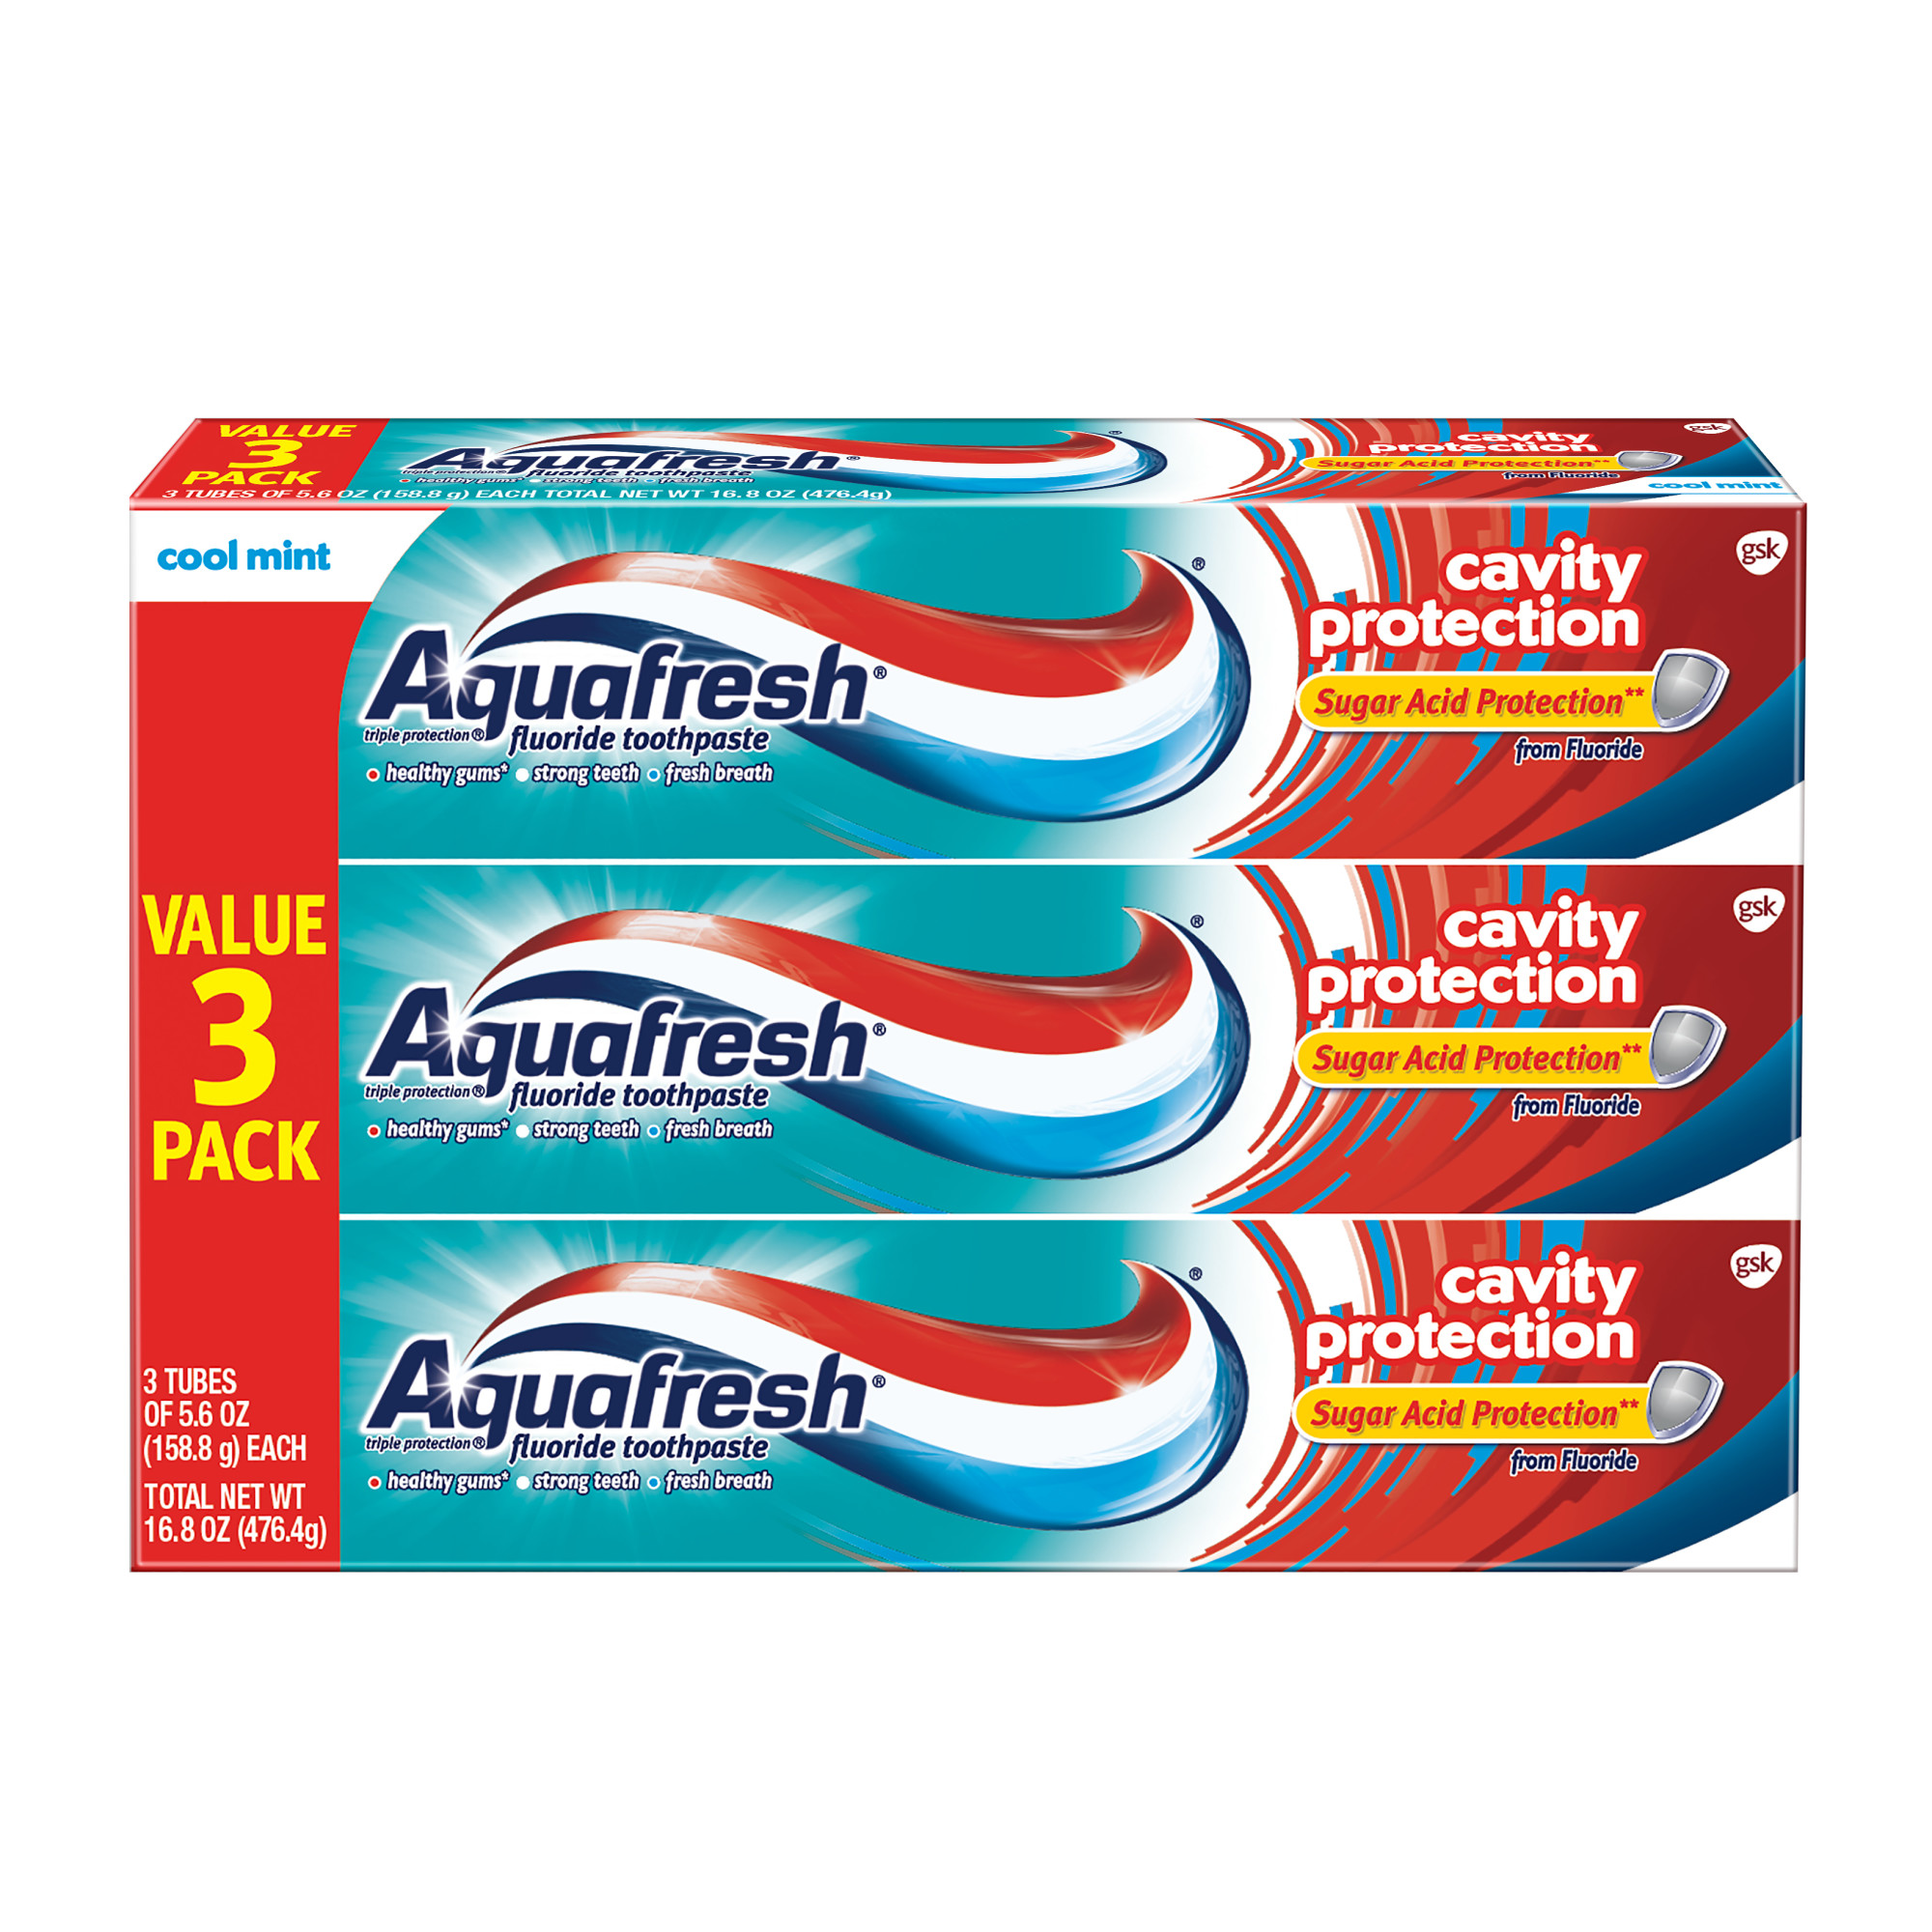 Aquafresh Cavity Protection Fluoride Toothpaste, Cool Mint, 5.6 oz, 3 Pack - image 1 of 8